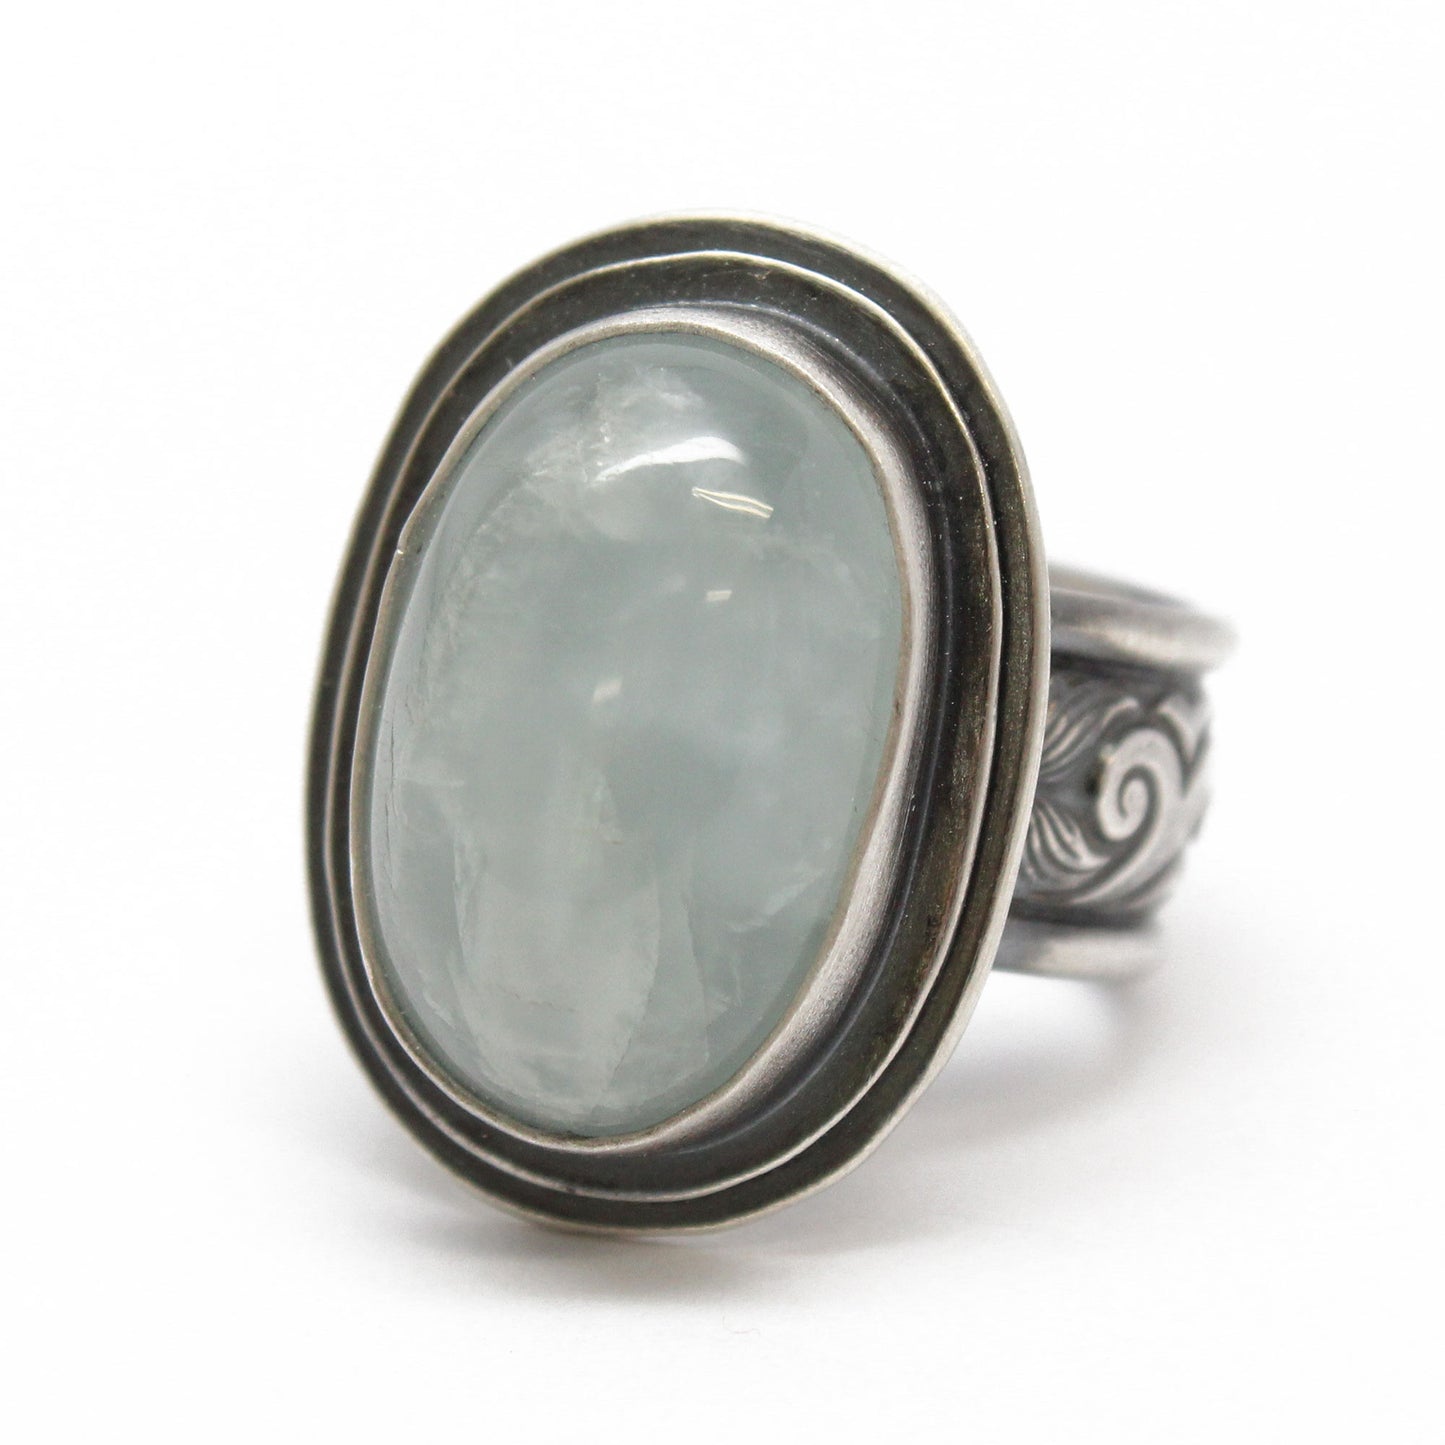 Aquamarine Ring in 925 Sterling Silver, Size 8 US